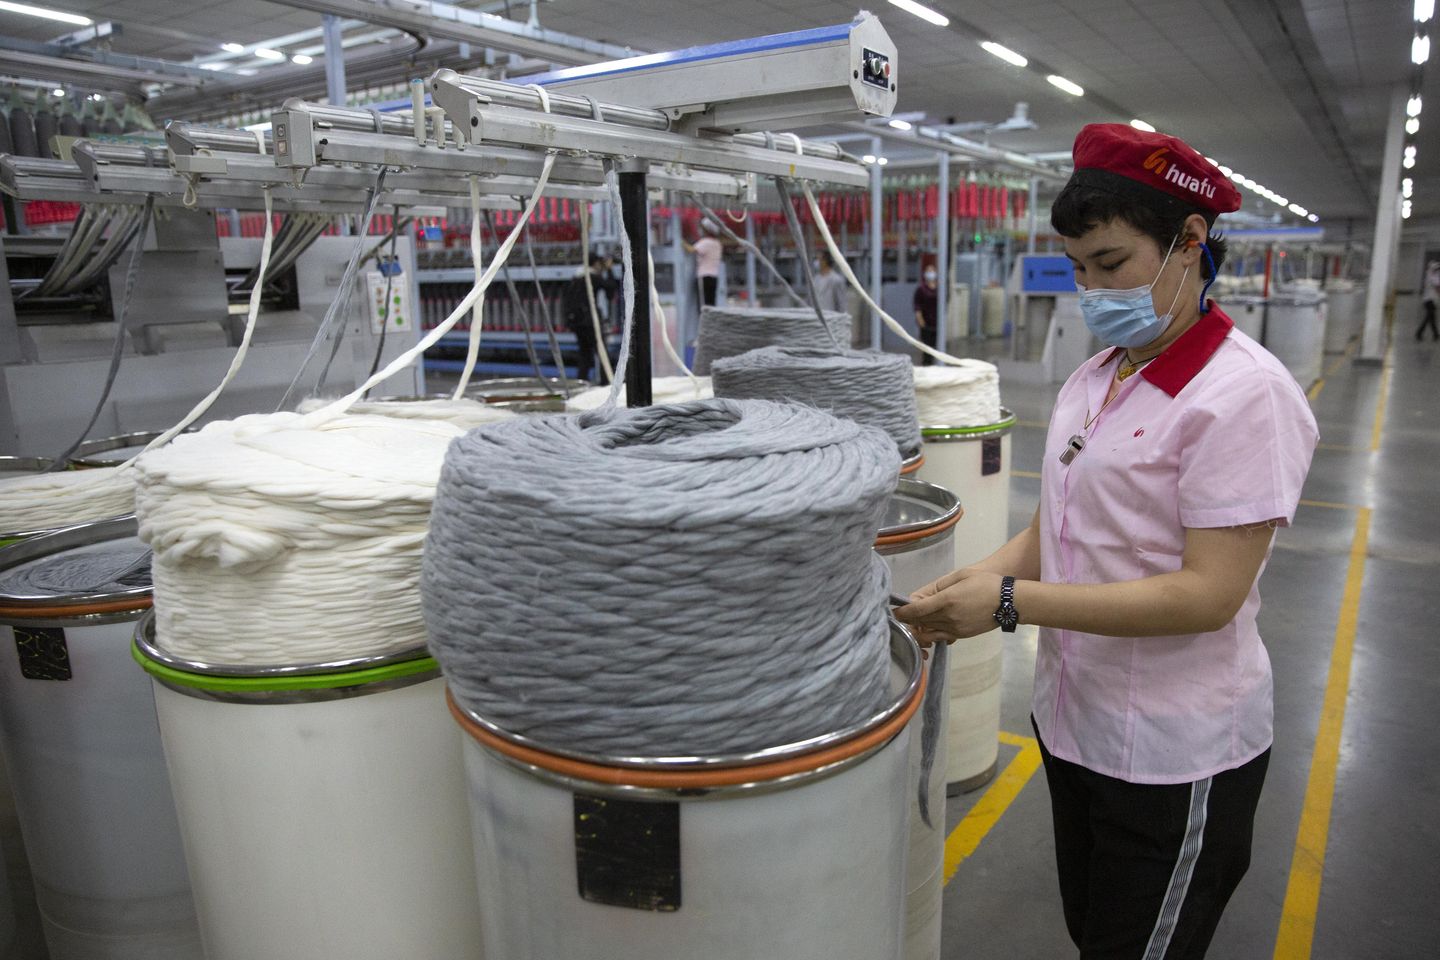 EU plans to ban products made with forced labor